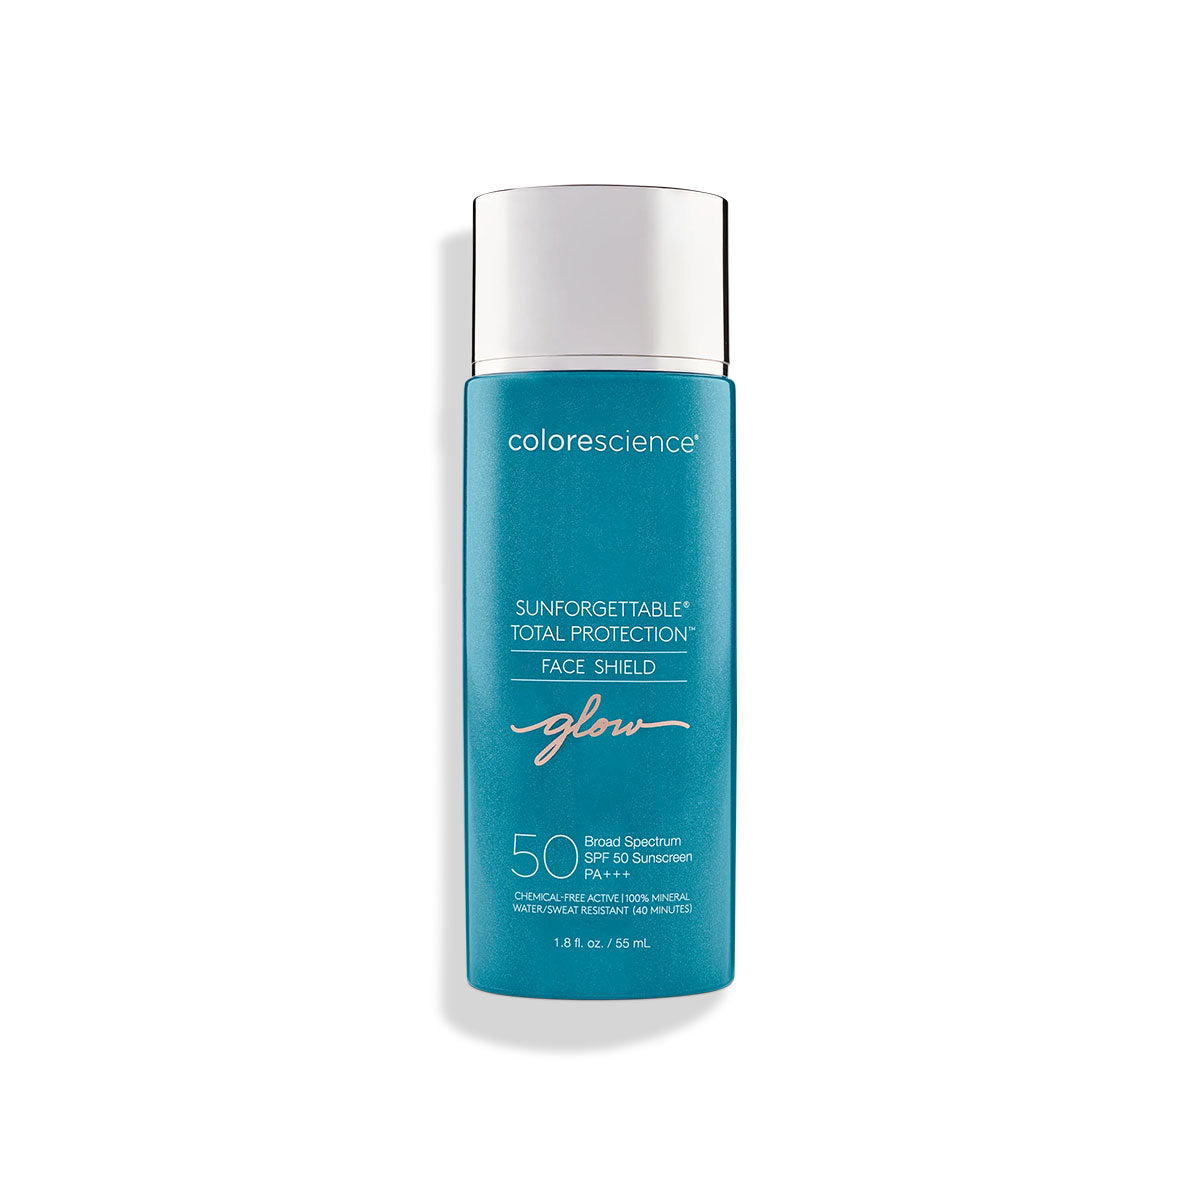 colorescience Sunforgettable Total Protection Face Shield Glow SPF 50